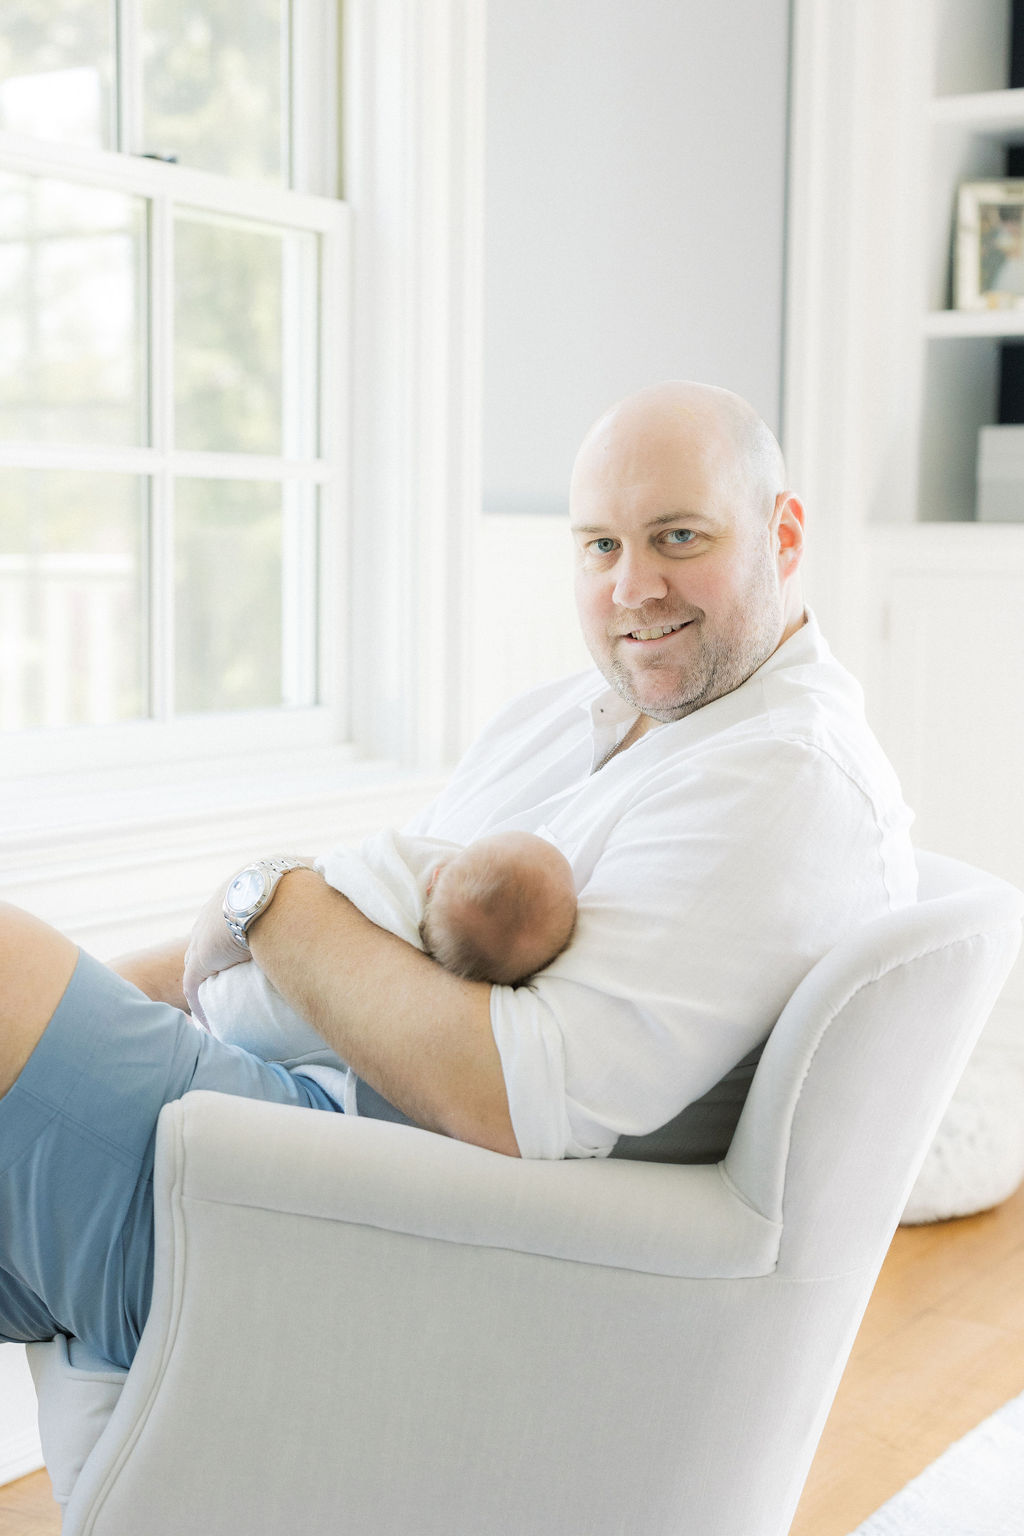 A happy dad sits in a chair smiling with his newborn baby sleeping in his lap